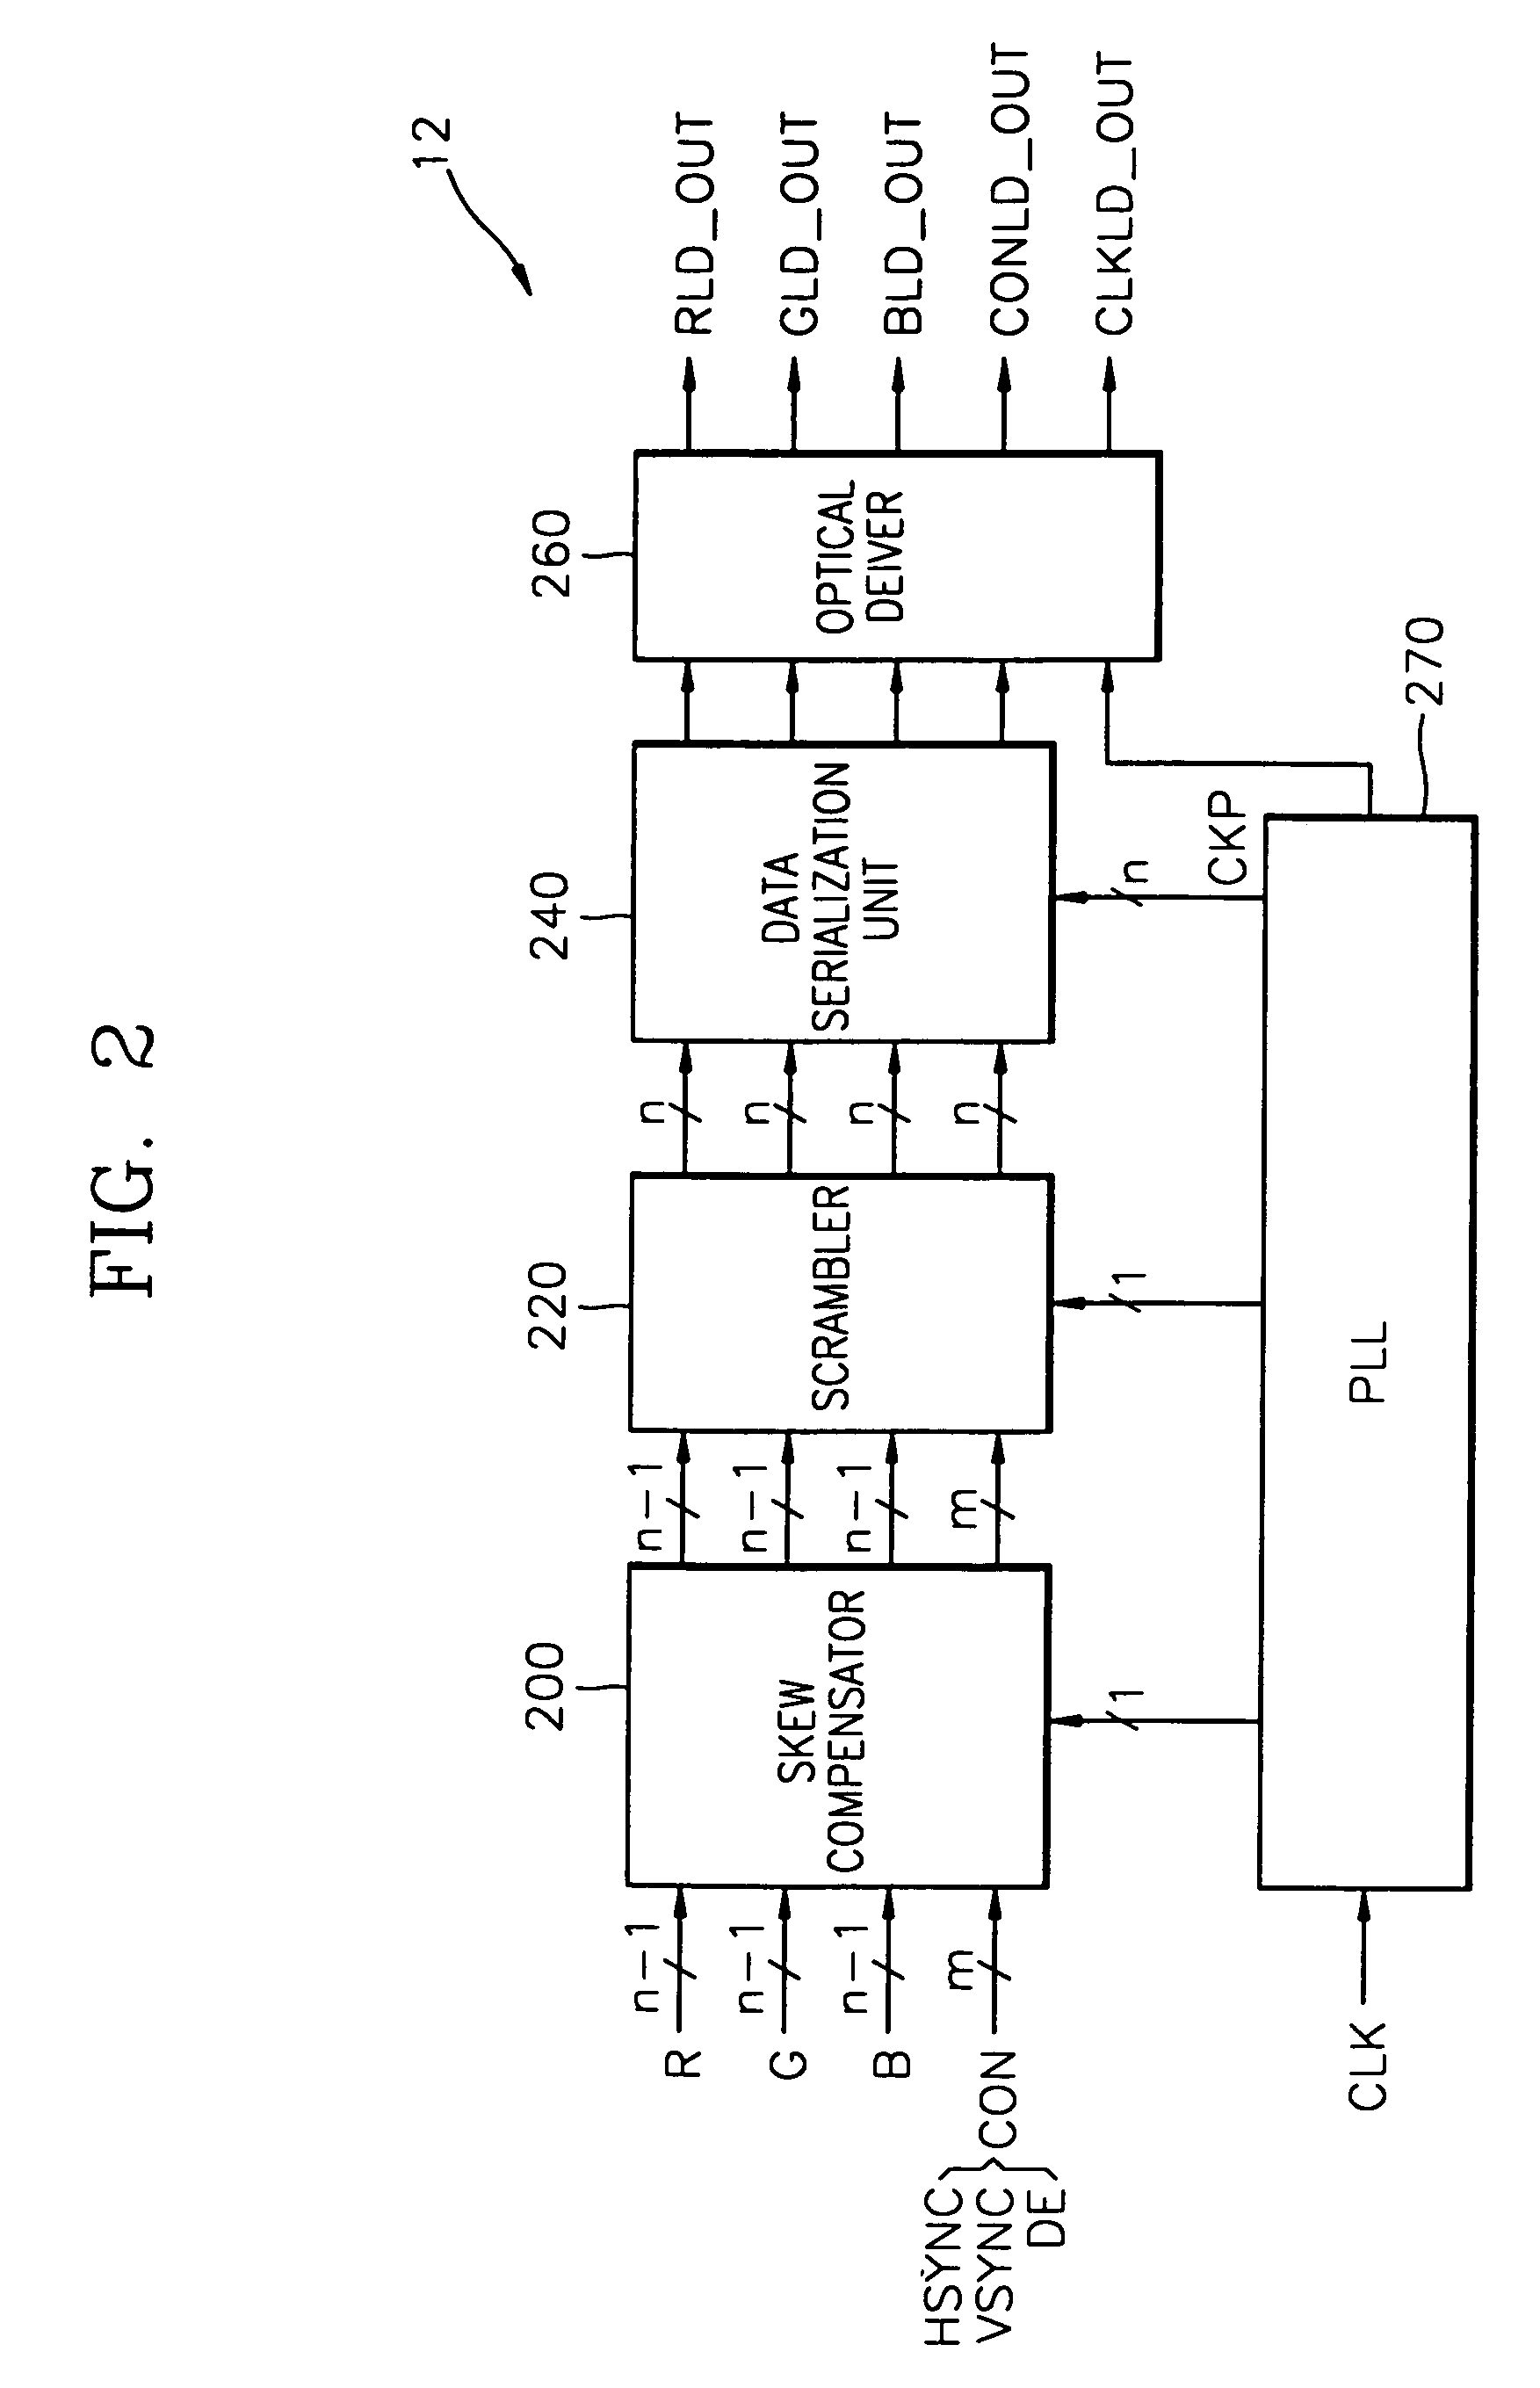 Optical transfer system having a transmitter and a receiver